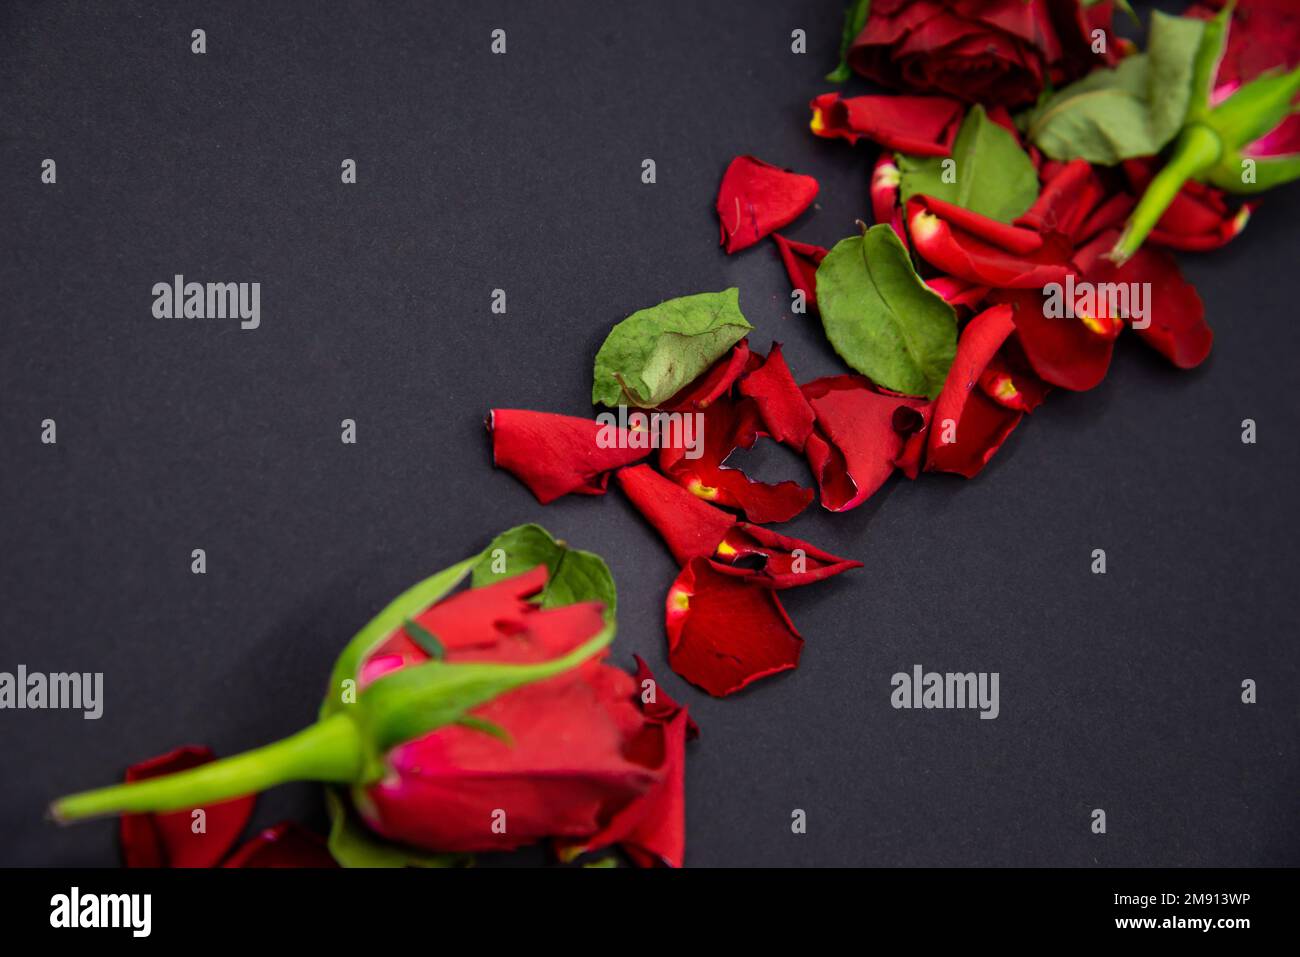 Close-up of red rose flowers and green leaves on a black background. Stock Photo